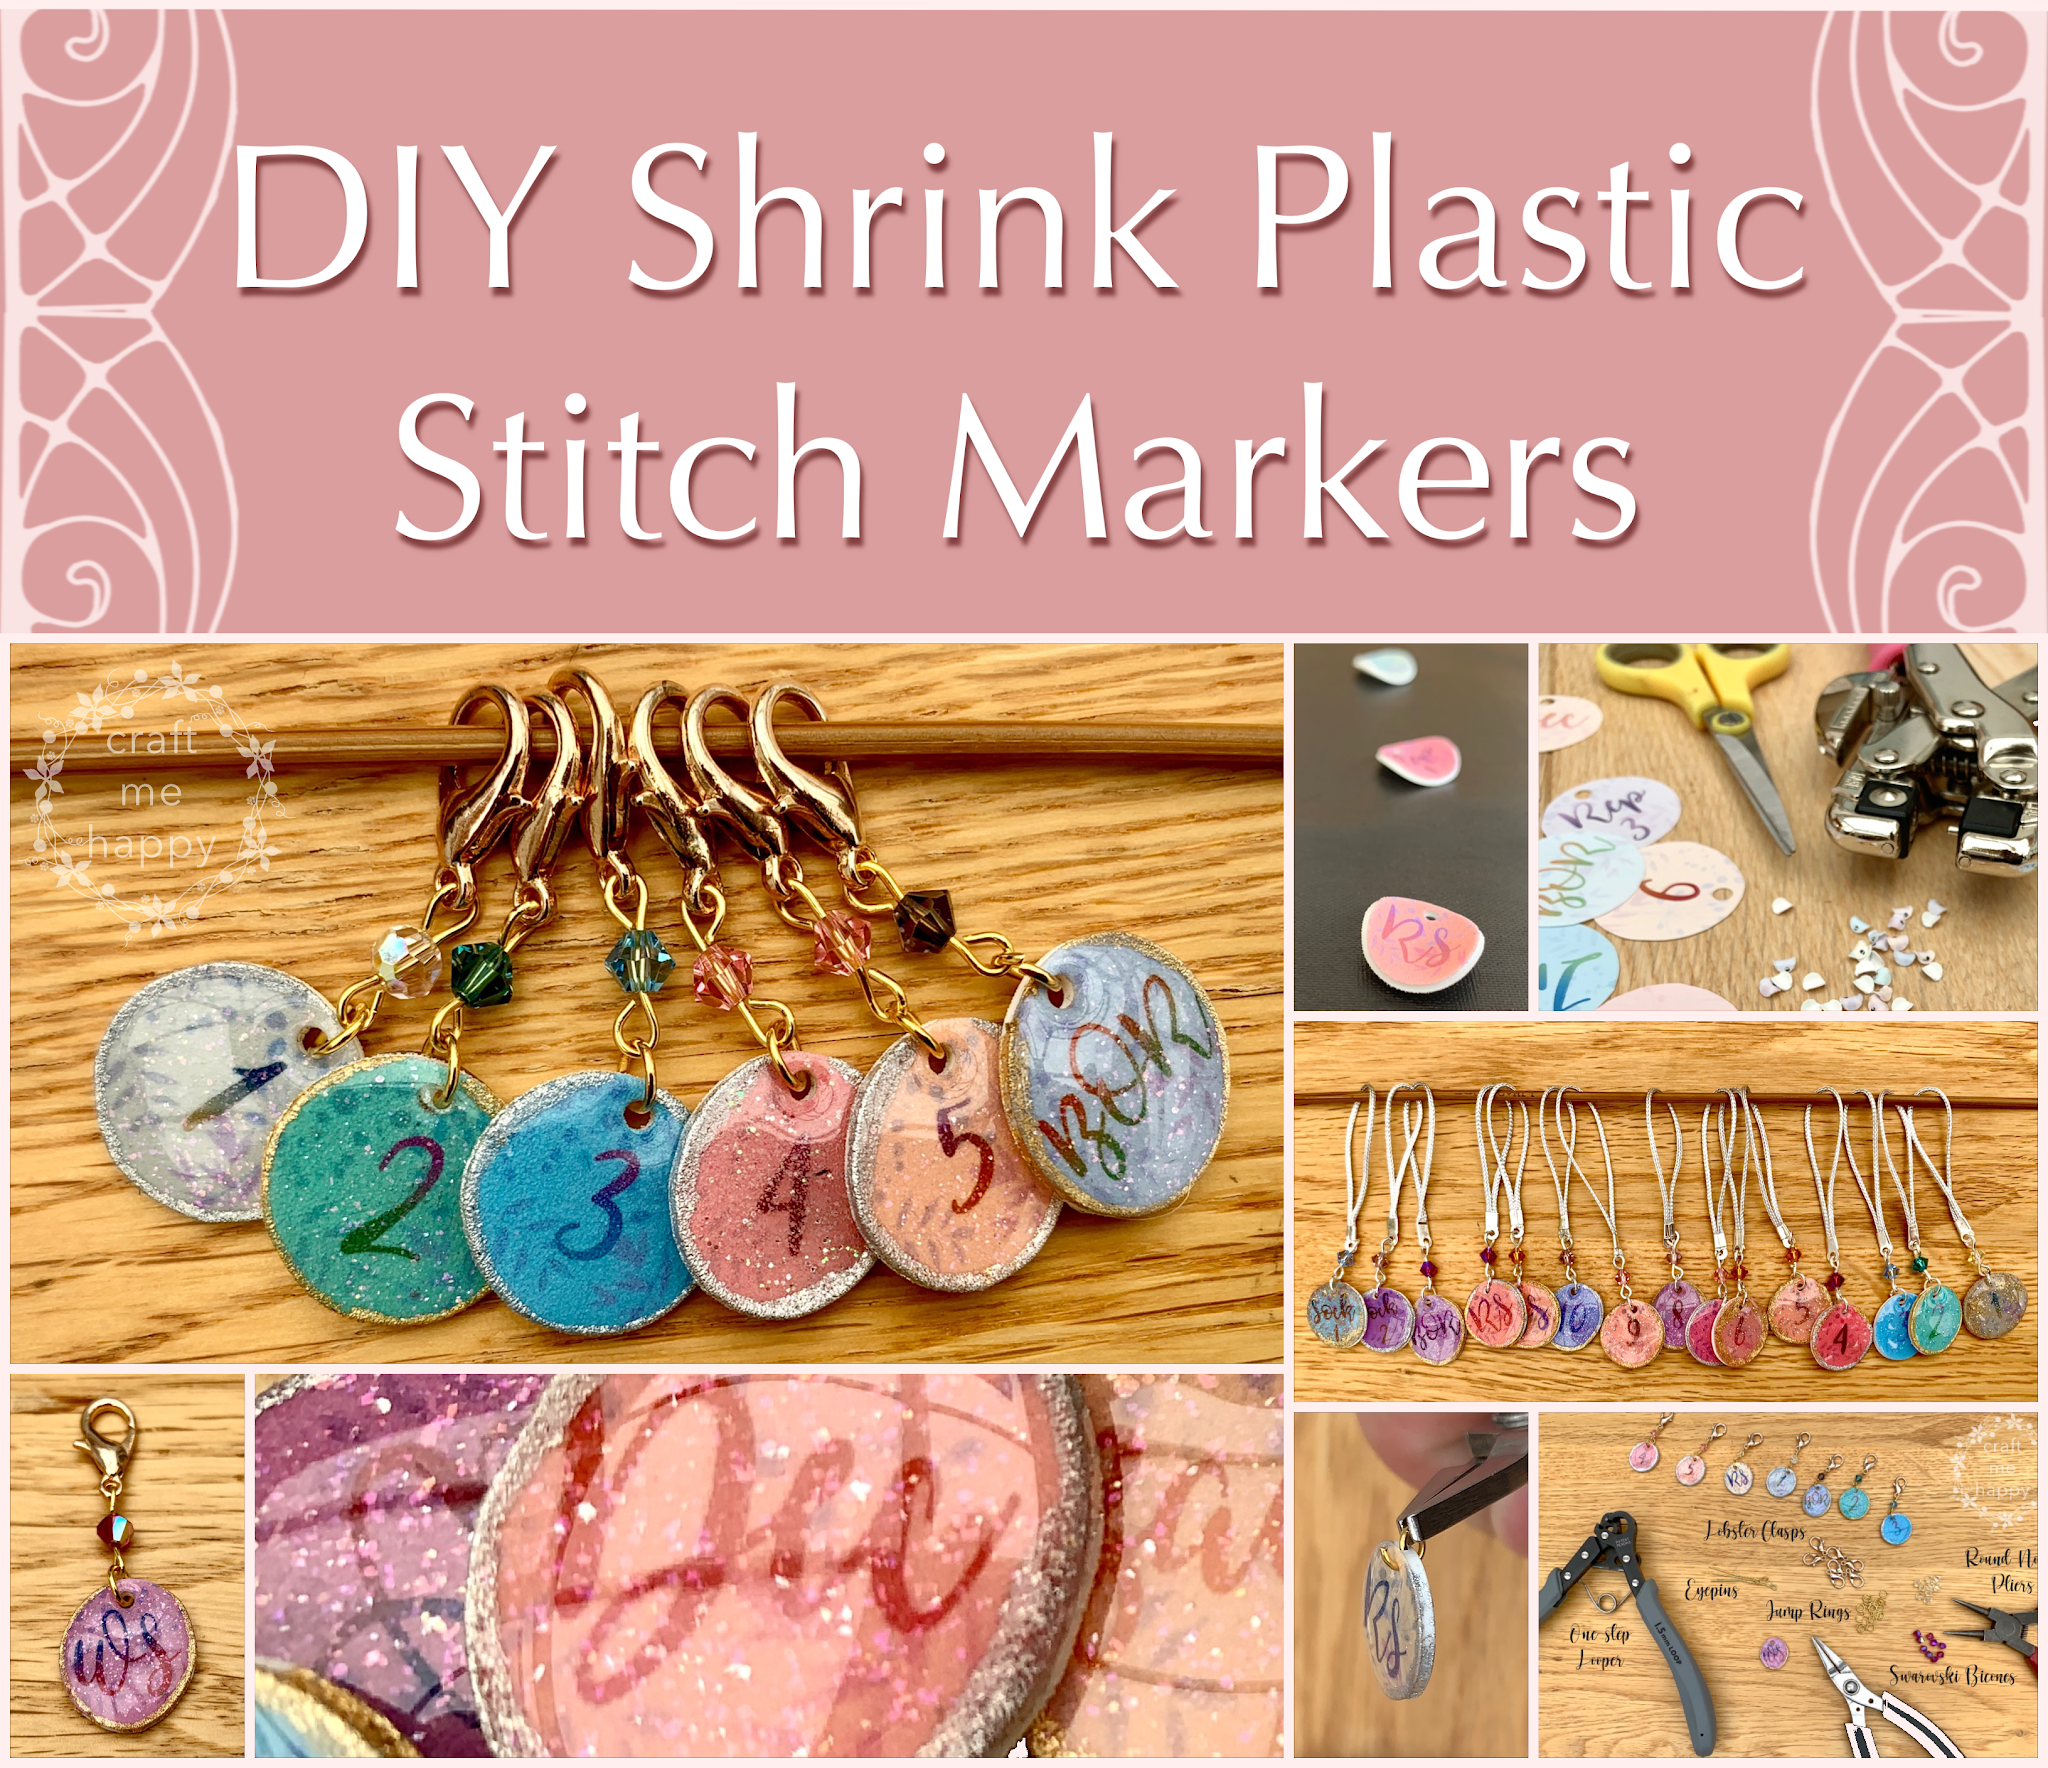 Craft me Happy!: Shrink Plastic Stitch Markers - A Free Printable